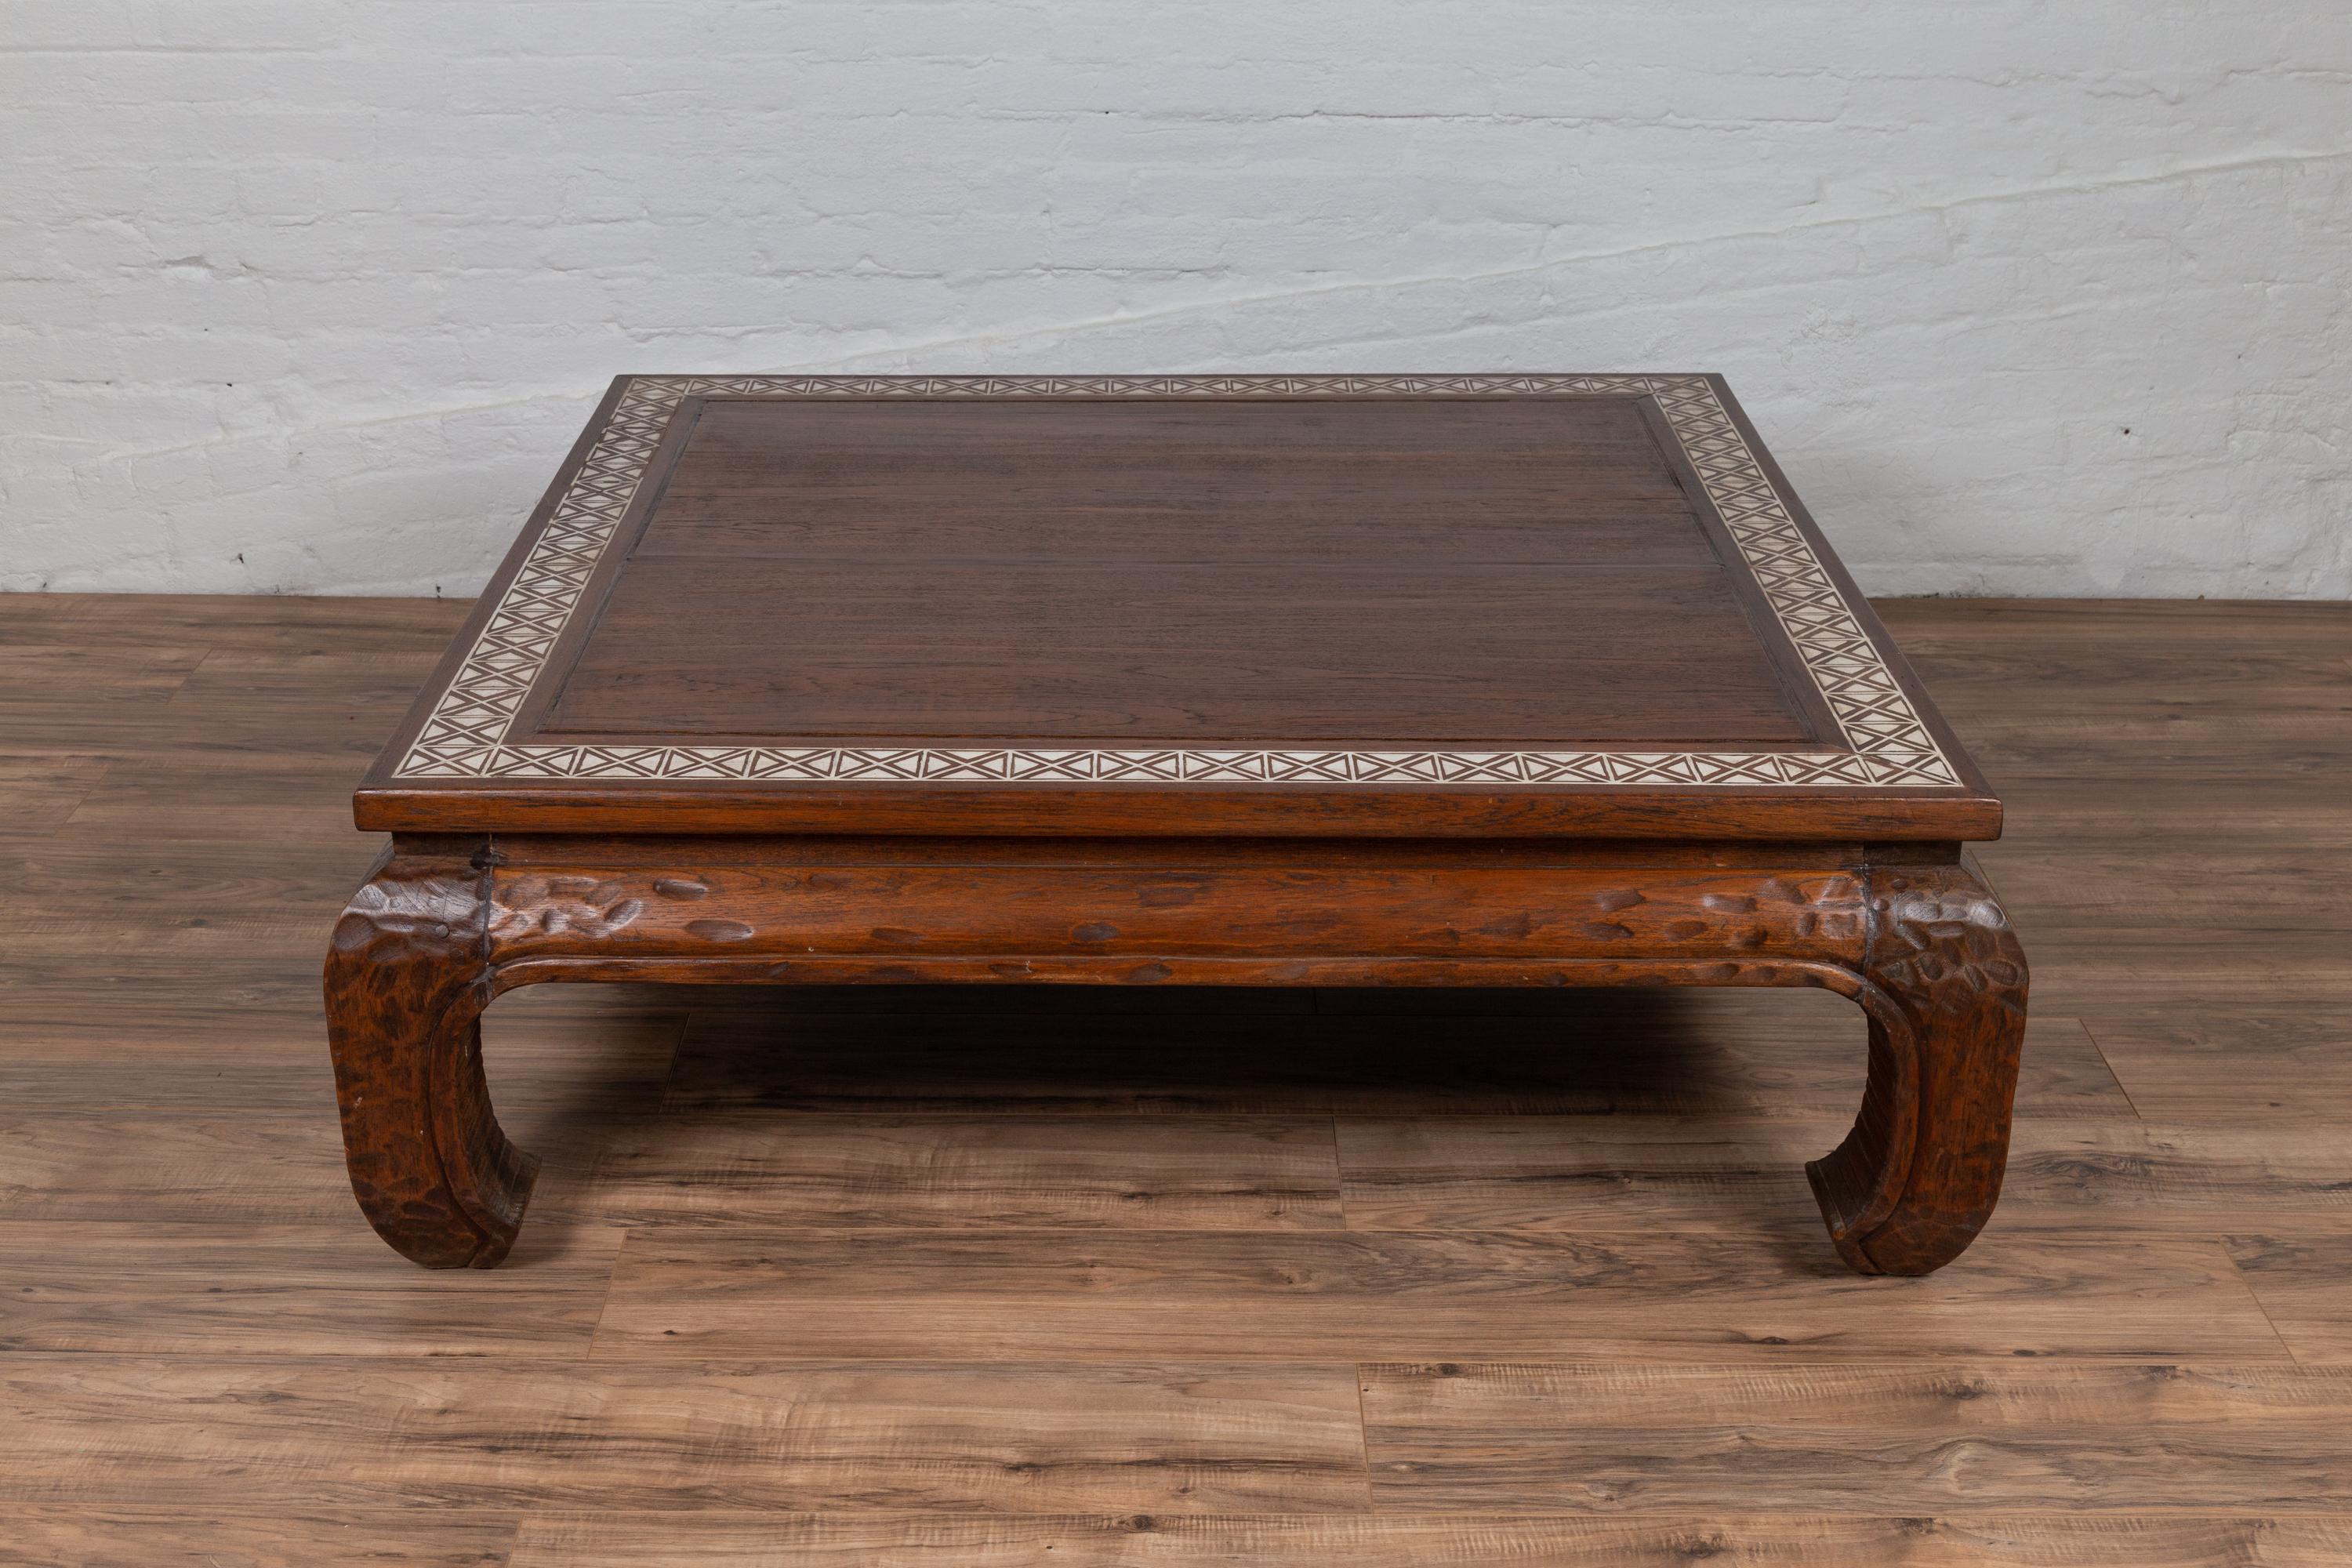 An antique Indonesian teak coffee table from the early 20th century, with X motifs on white ground, inspired by a tribal design. Born in Indonesia during the early years of the 20th century, this coffee table features a square top, adorned on the